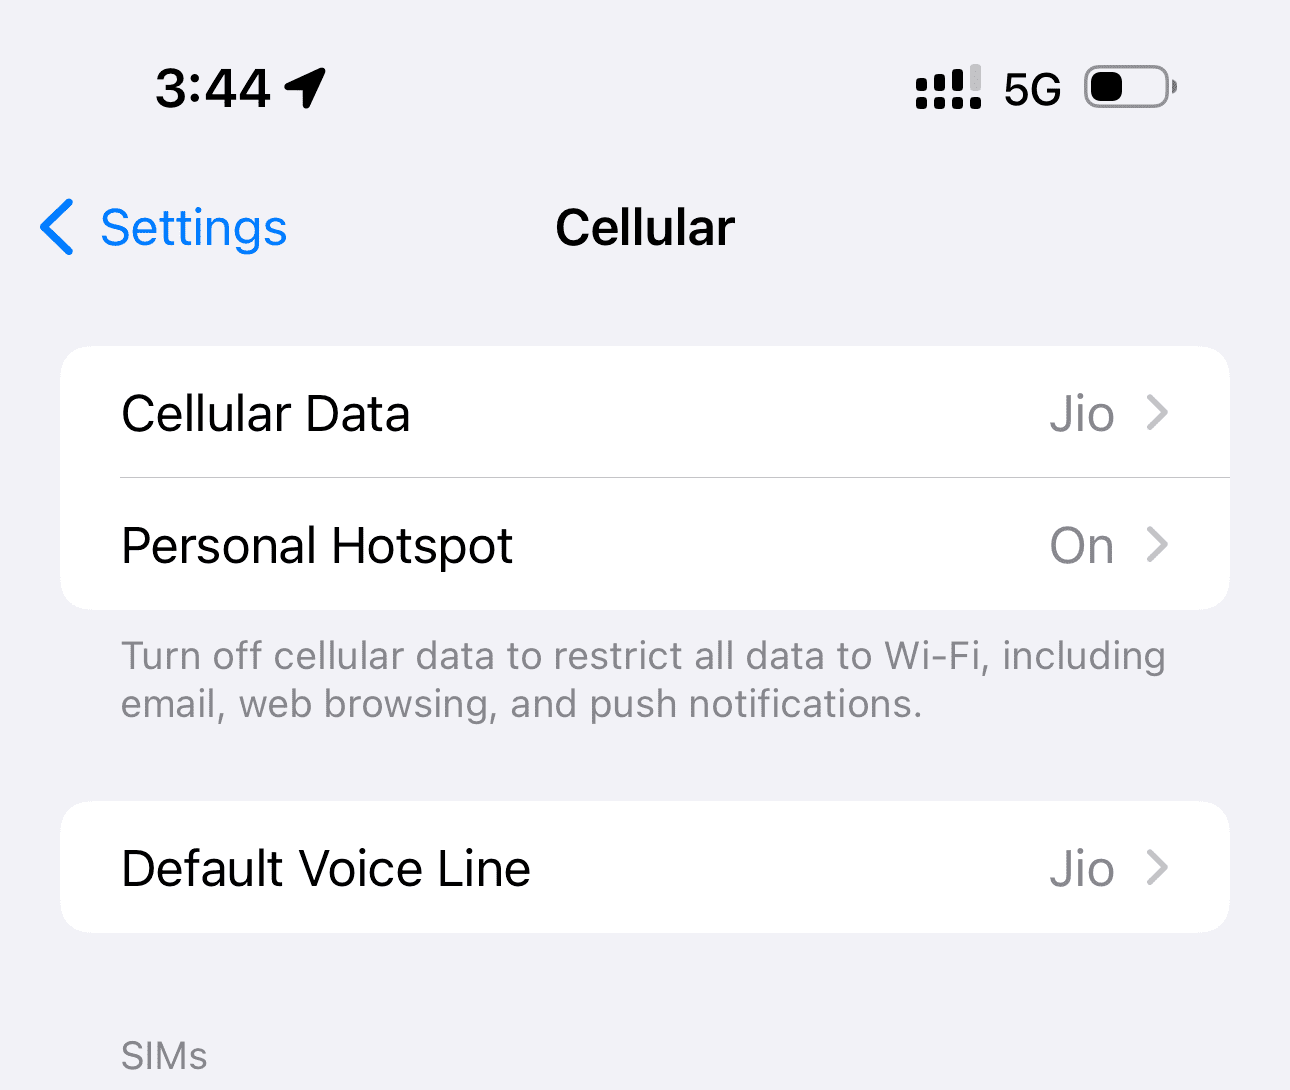 Cellular settings screen on iPhone